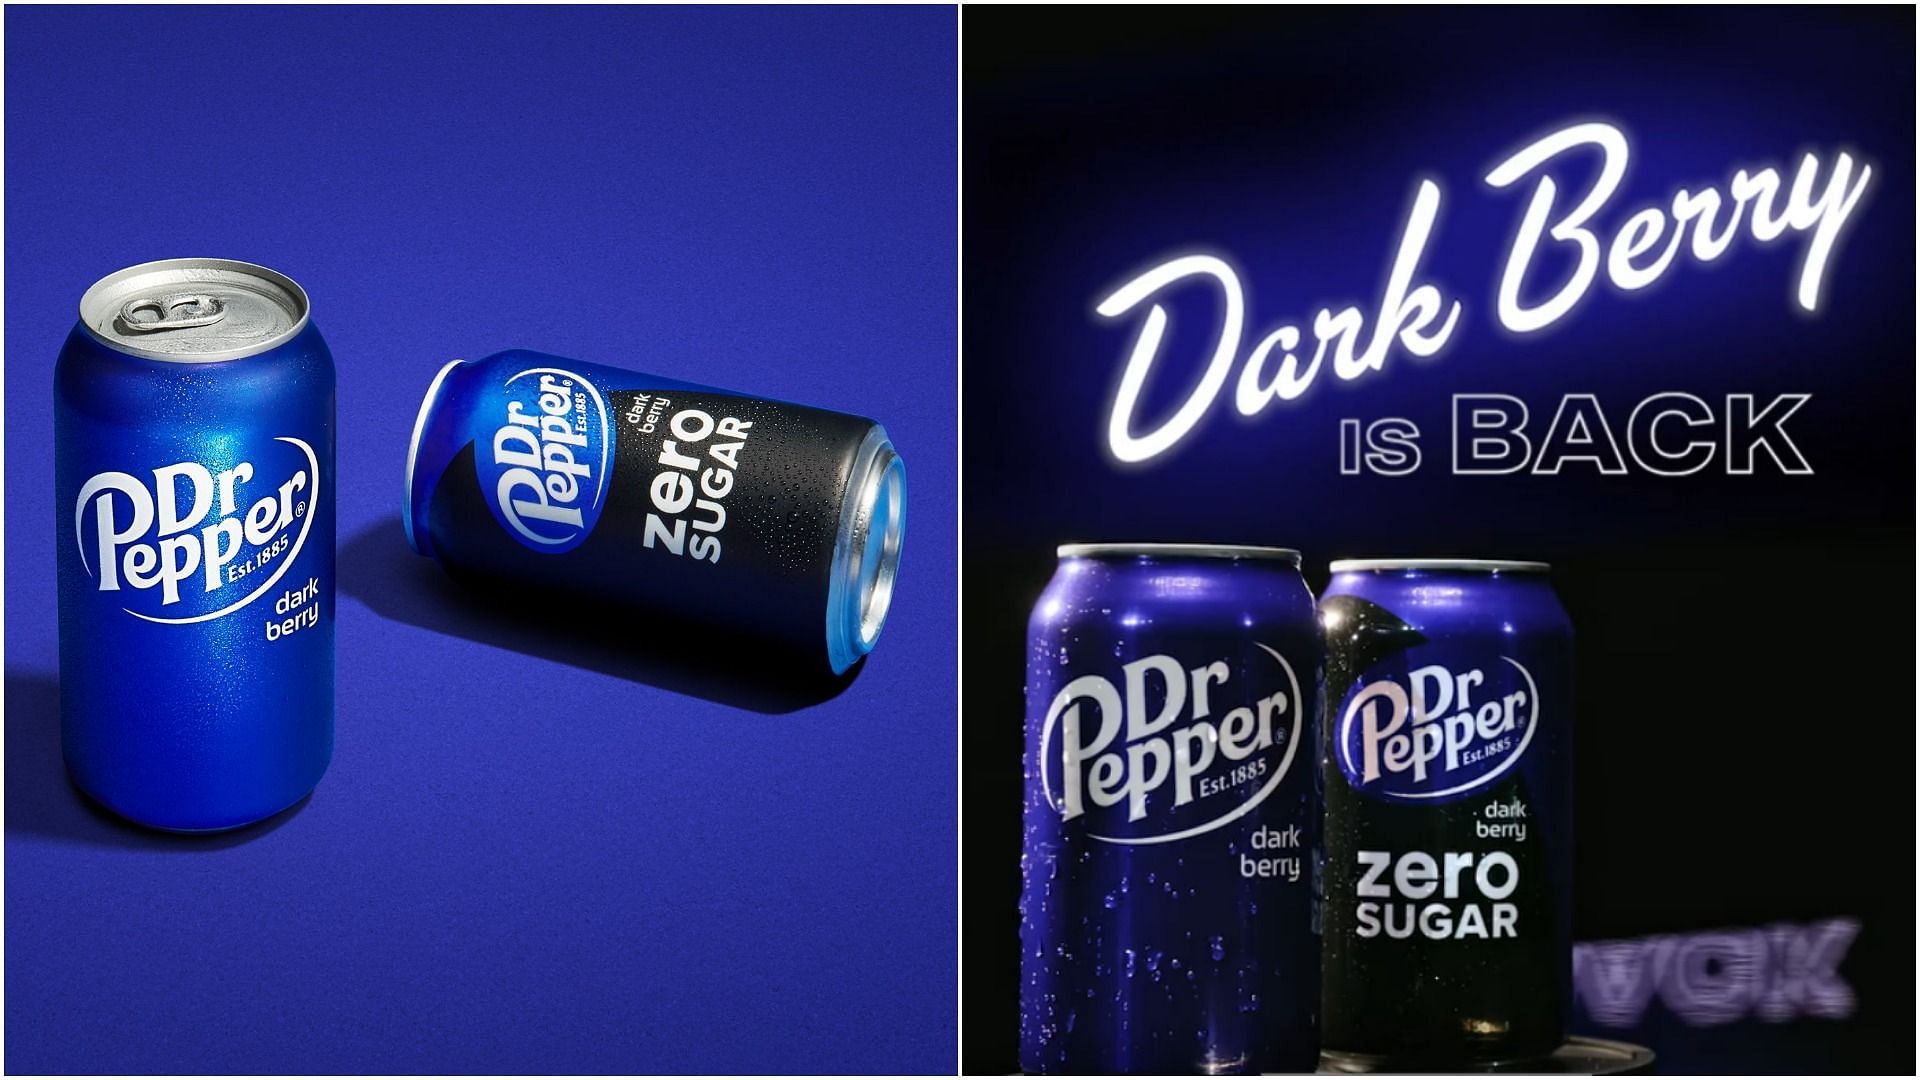 The Dark Berry is a popular flavor among soda fans (Image via @drpepper/Instagram)